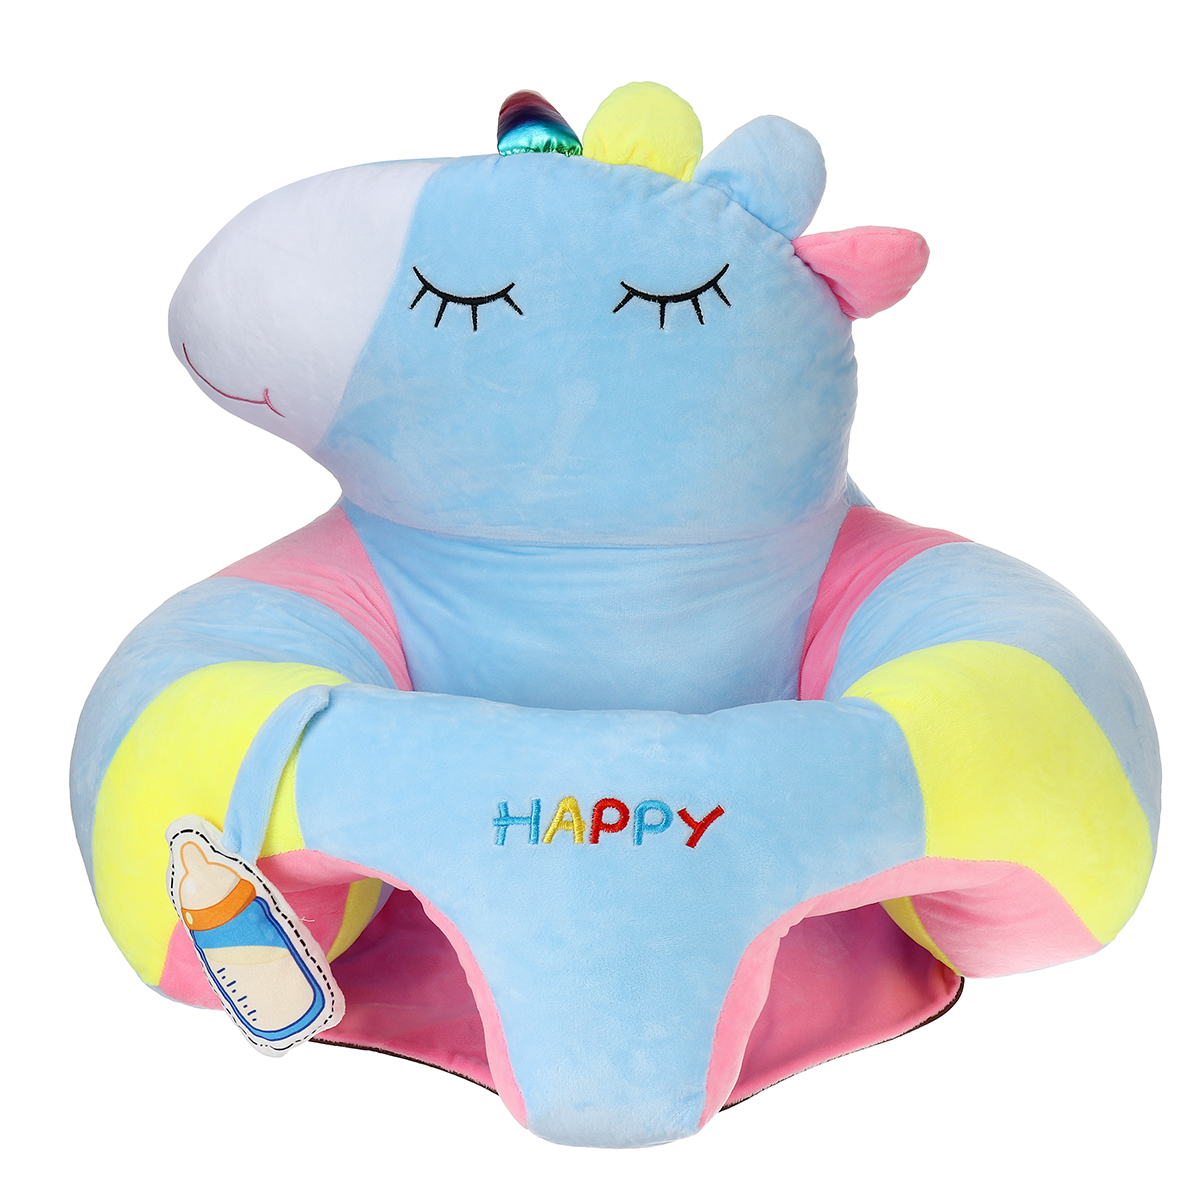 Multi-Style-Kids-Baby-Support-Seats-Sit-Up-Soft-Chair-Sofa-Cartoon-Animal-Kids-Learning-To-Sit-Plush-1817560-3